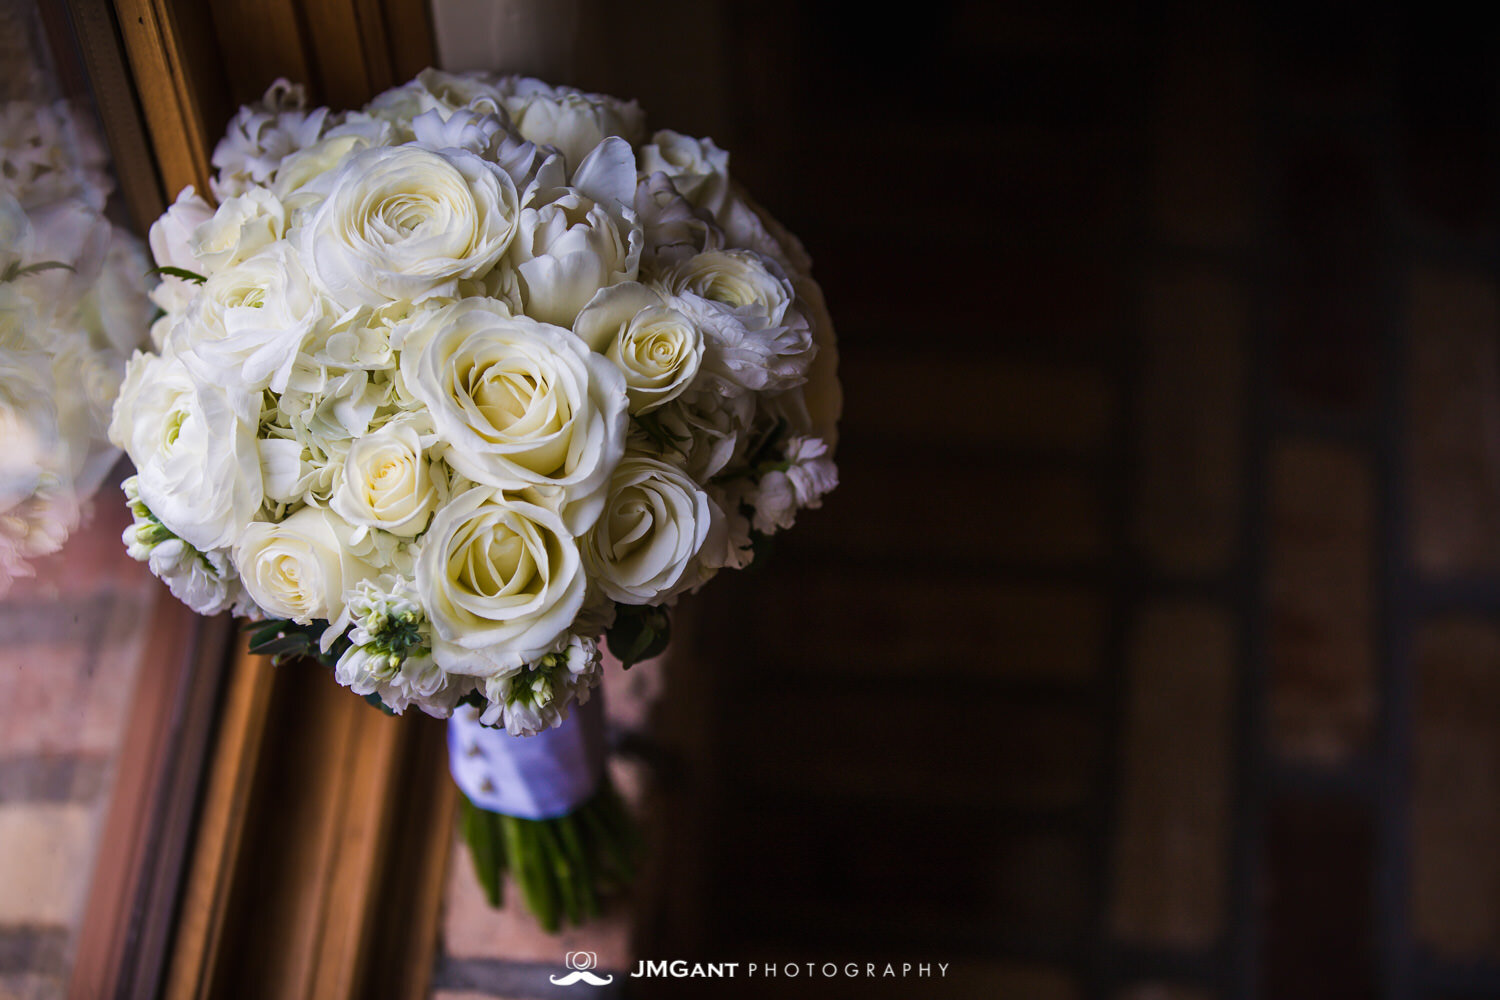  Bridal bouquet by floral designs of europe at an elegant wedding at the Della Terra Mountain Chateau in Estes Park Colorado. Photographed by Jared M. Gant of JMGant Photography. 